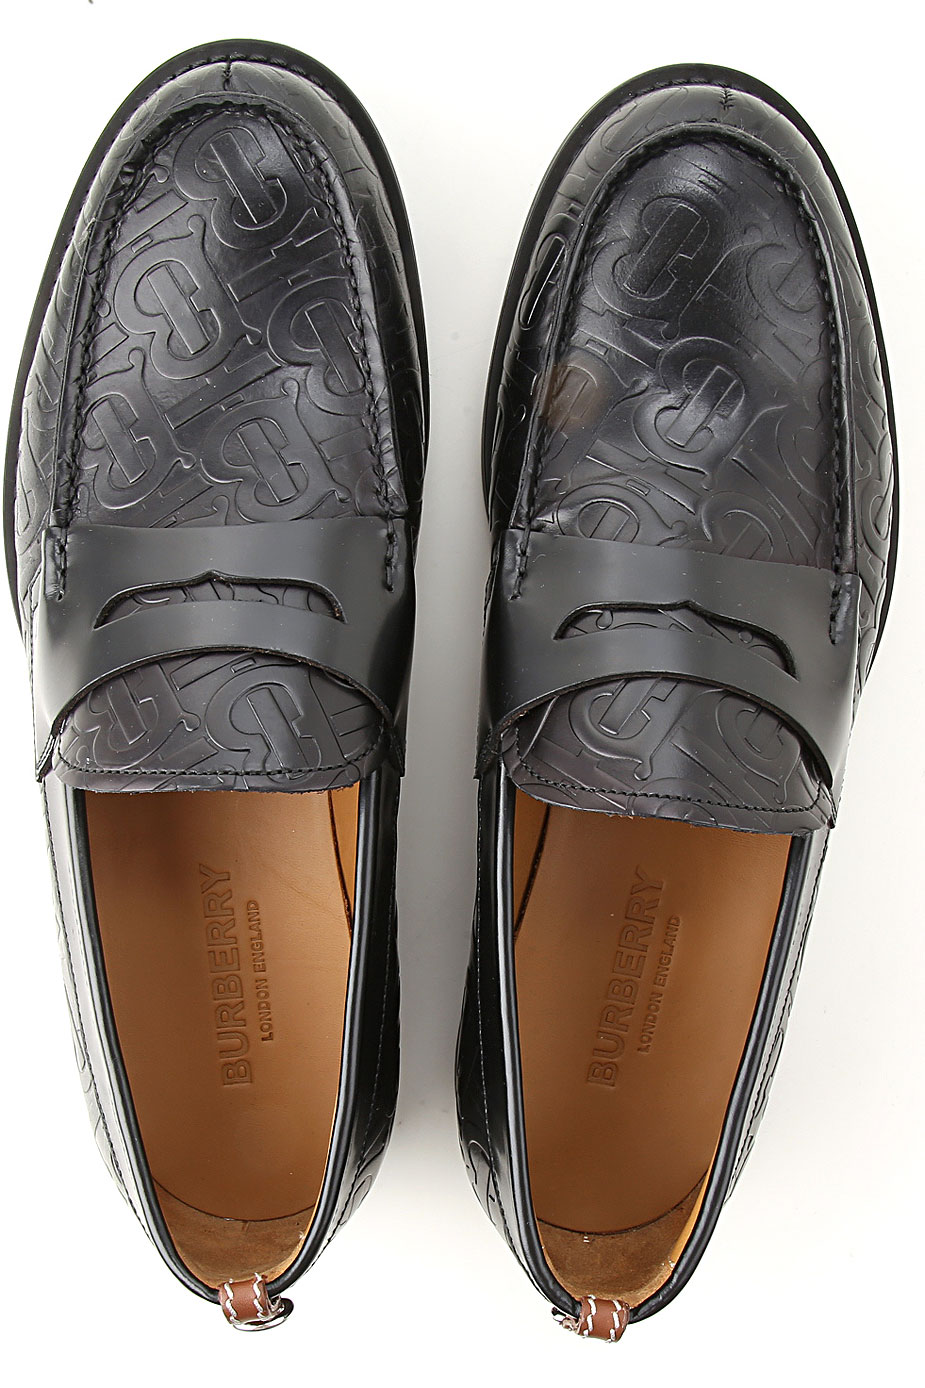 Mens Shoes Burberry, Style code: 8015753-a1189-